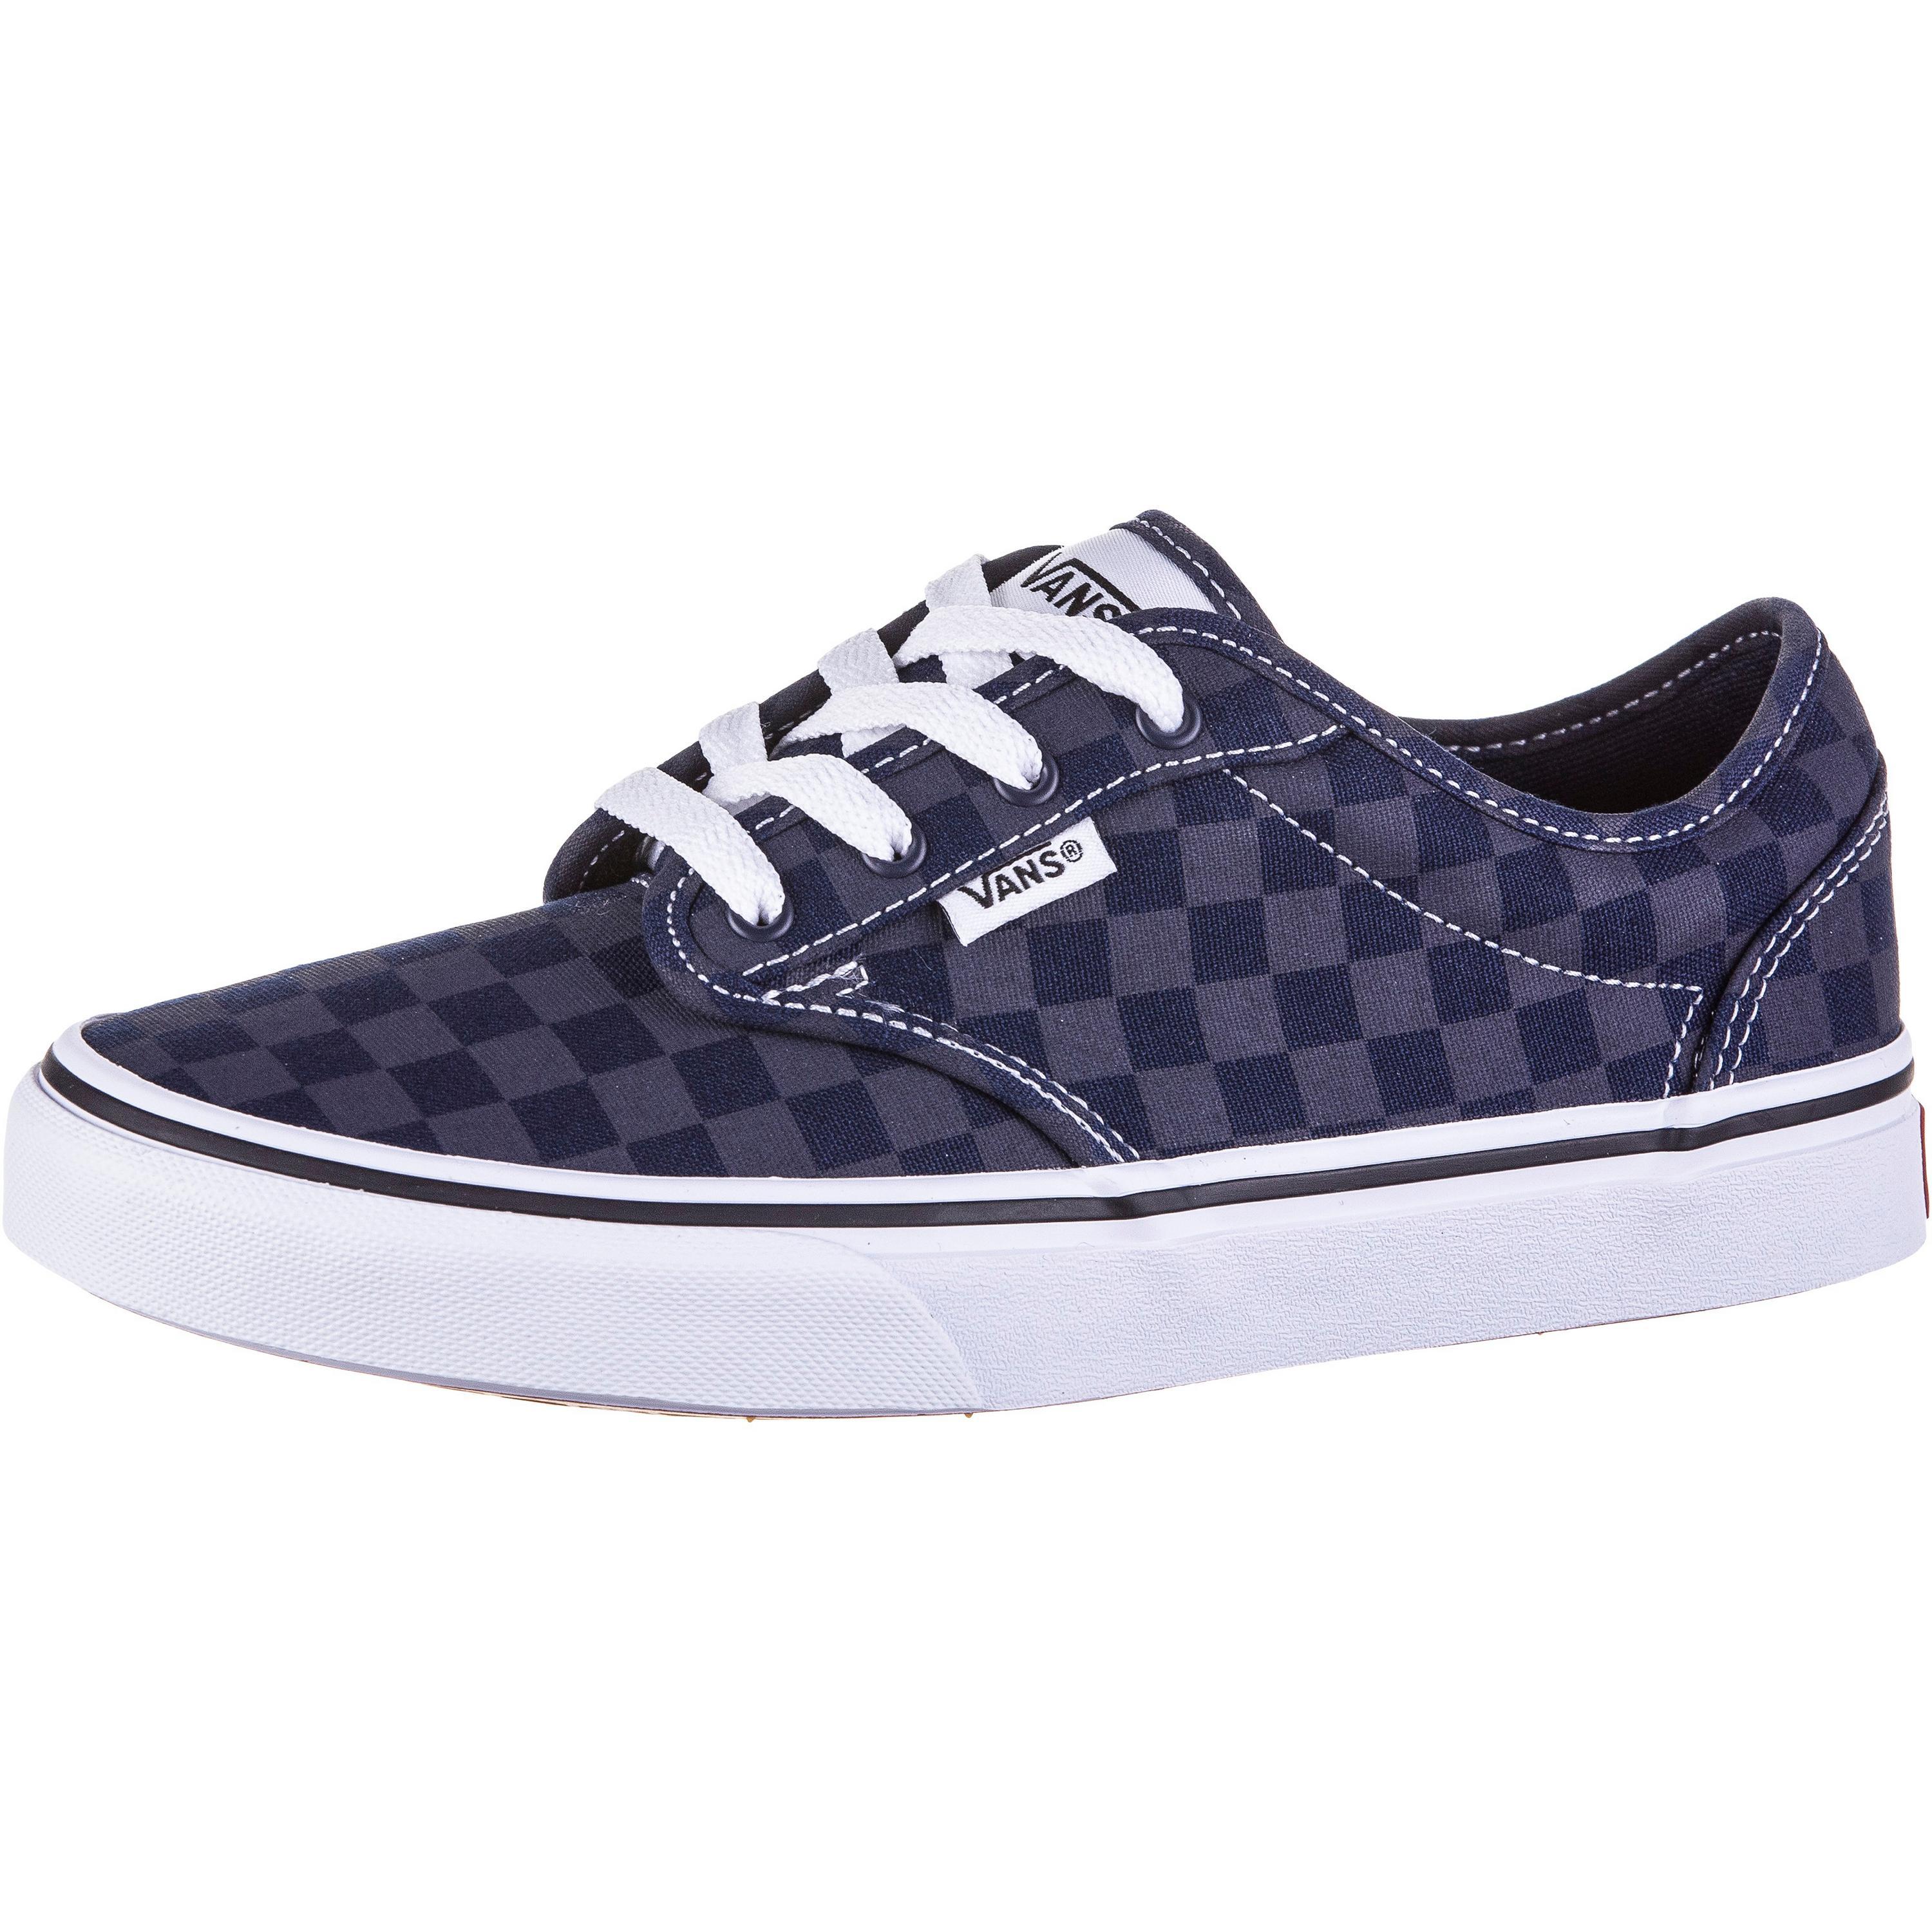 Vans Atwood VN0A349PLKZ1